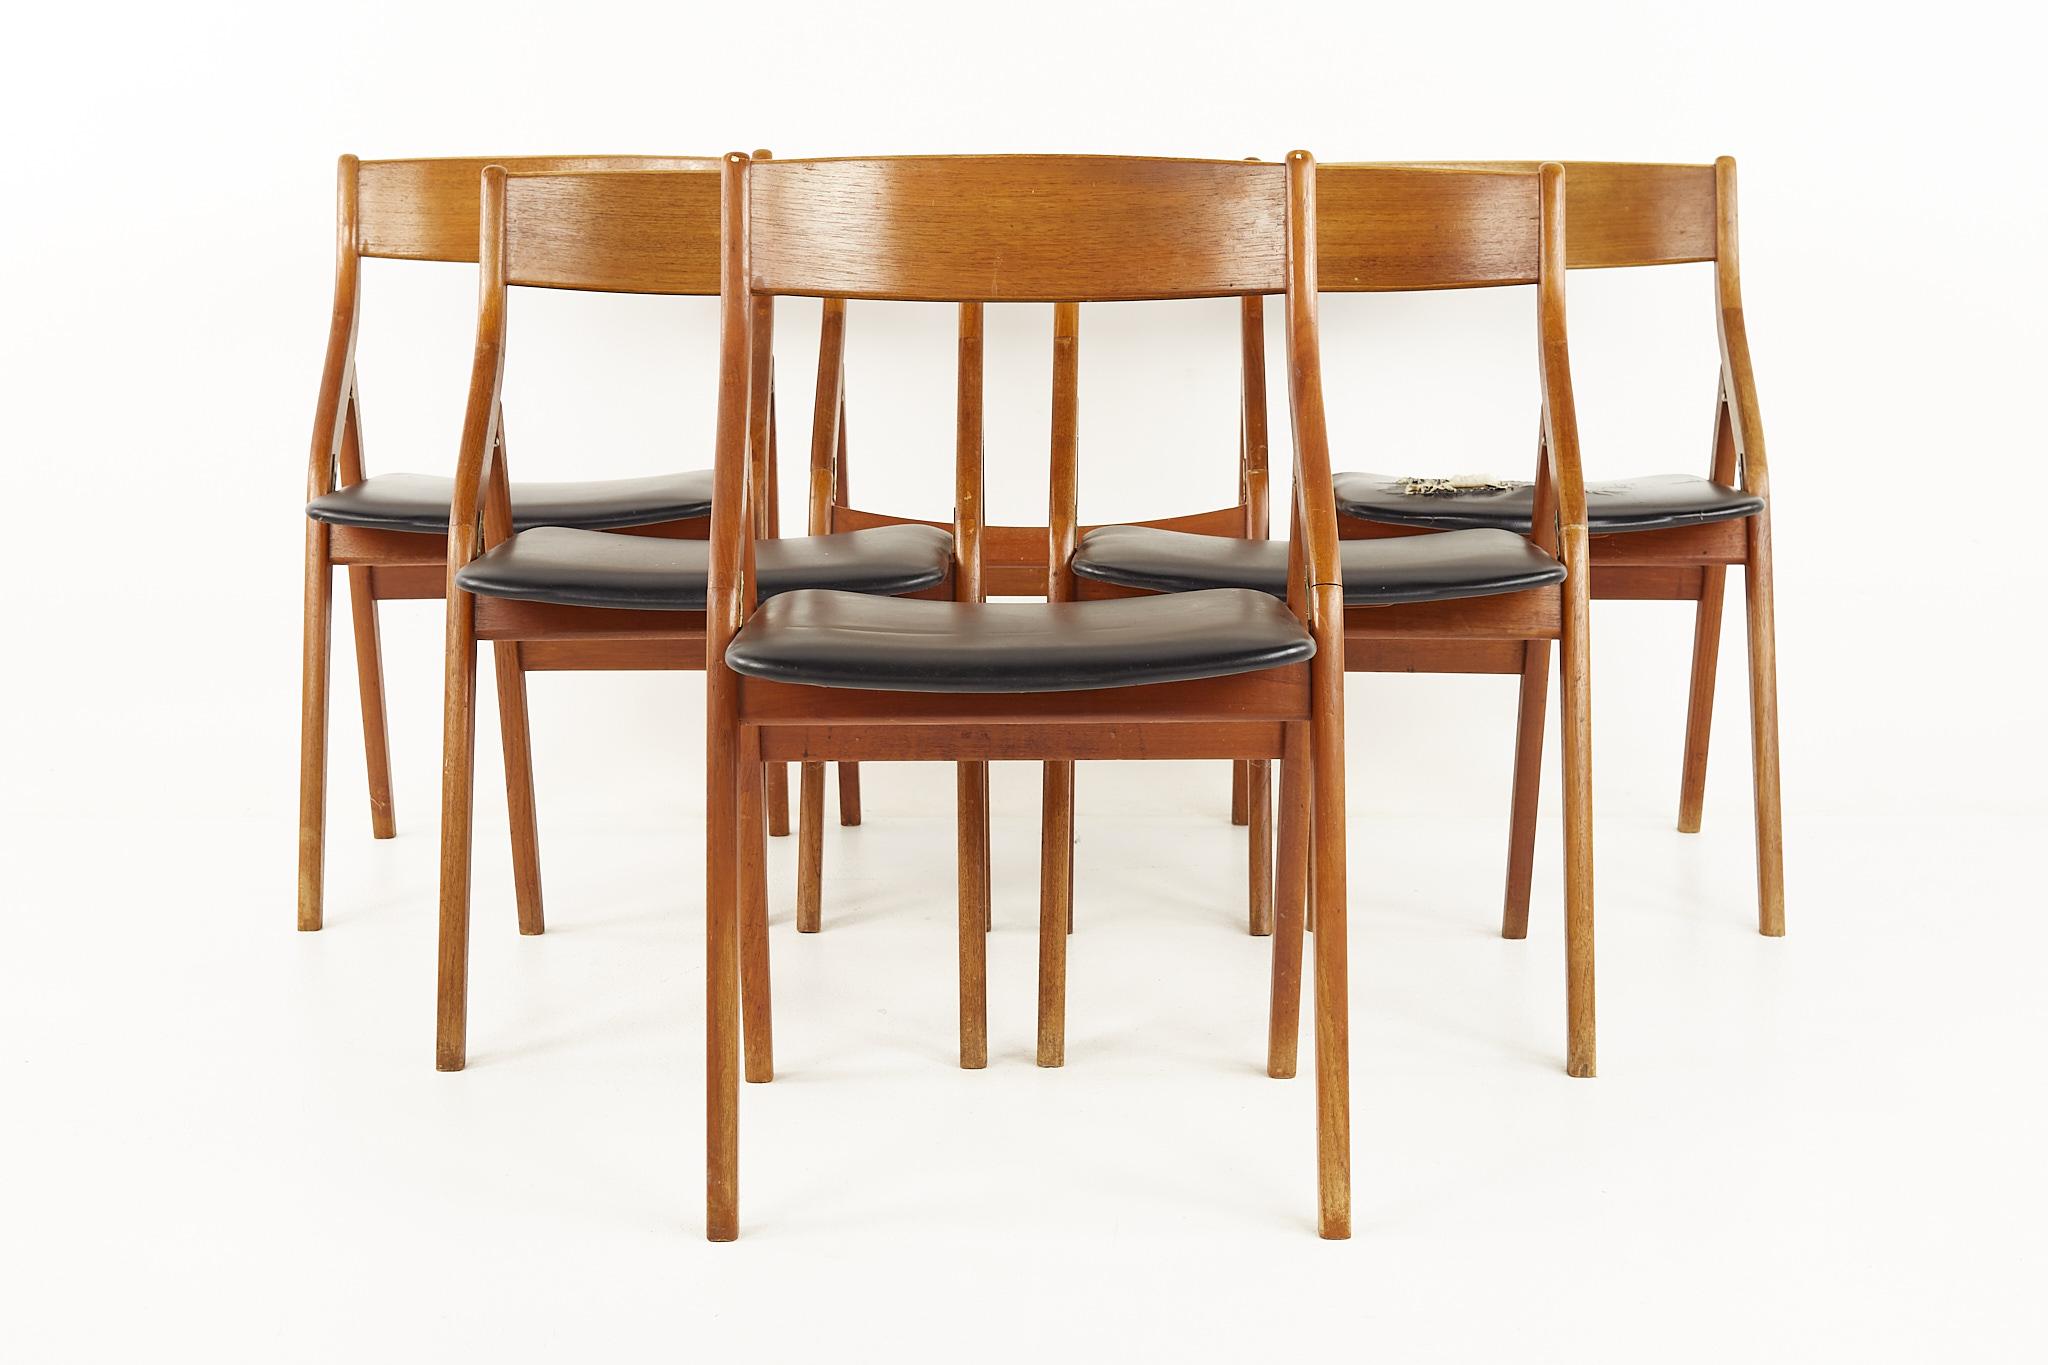 Dyrlund mid century teak folding chairs - Set of 6

Each chair measures: 19.5 wide x 18.5 deep x 31.5 high, with a seat height and chair clearance of 17.25

All pieces of furniture can be had in what we call restored vintage condition. That